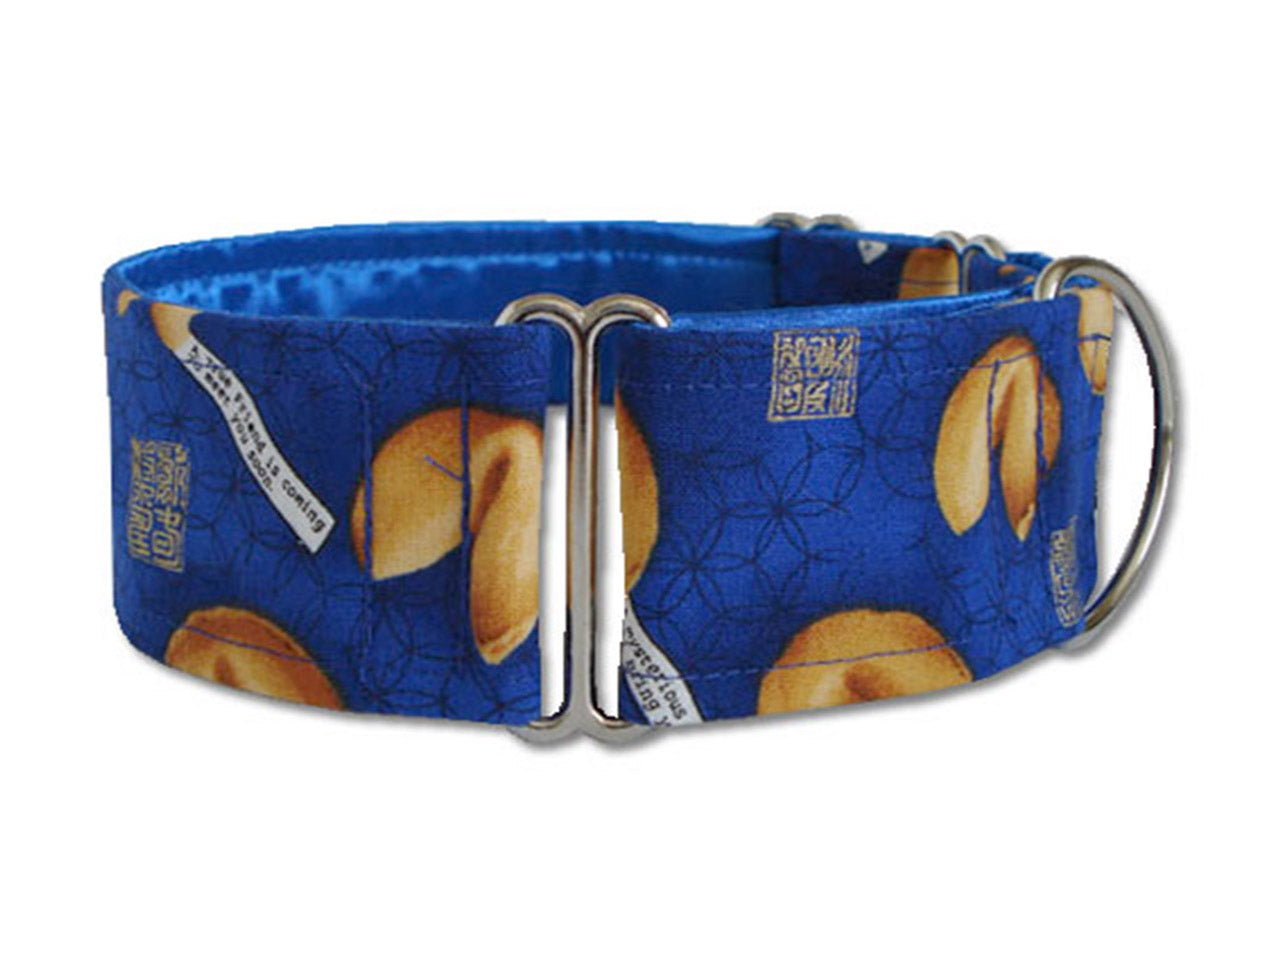 The golden fortune cookies on this bright blue collar say your pooch is one lucky dog!